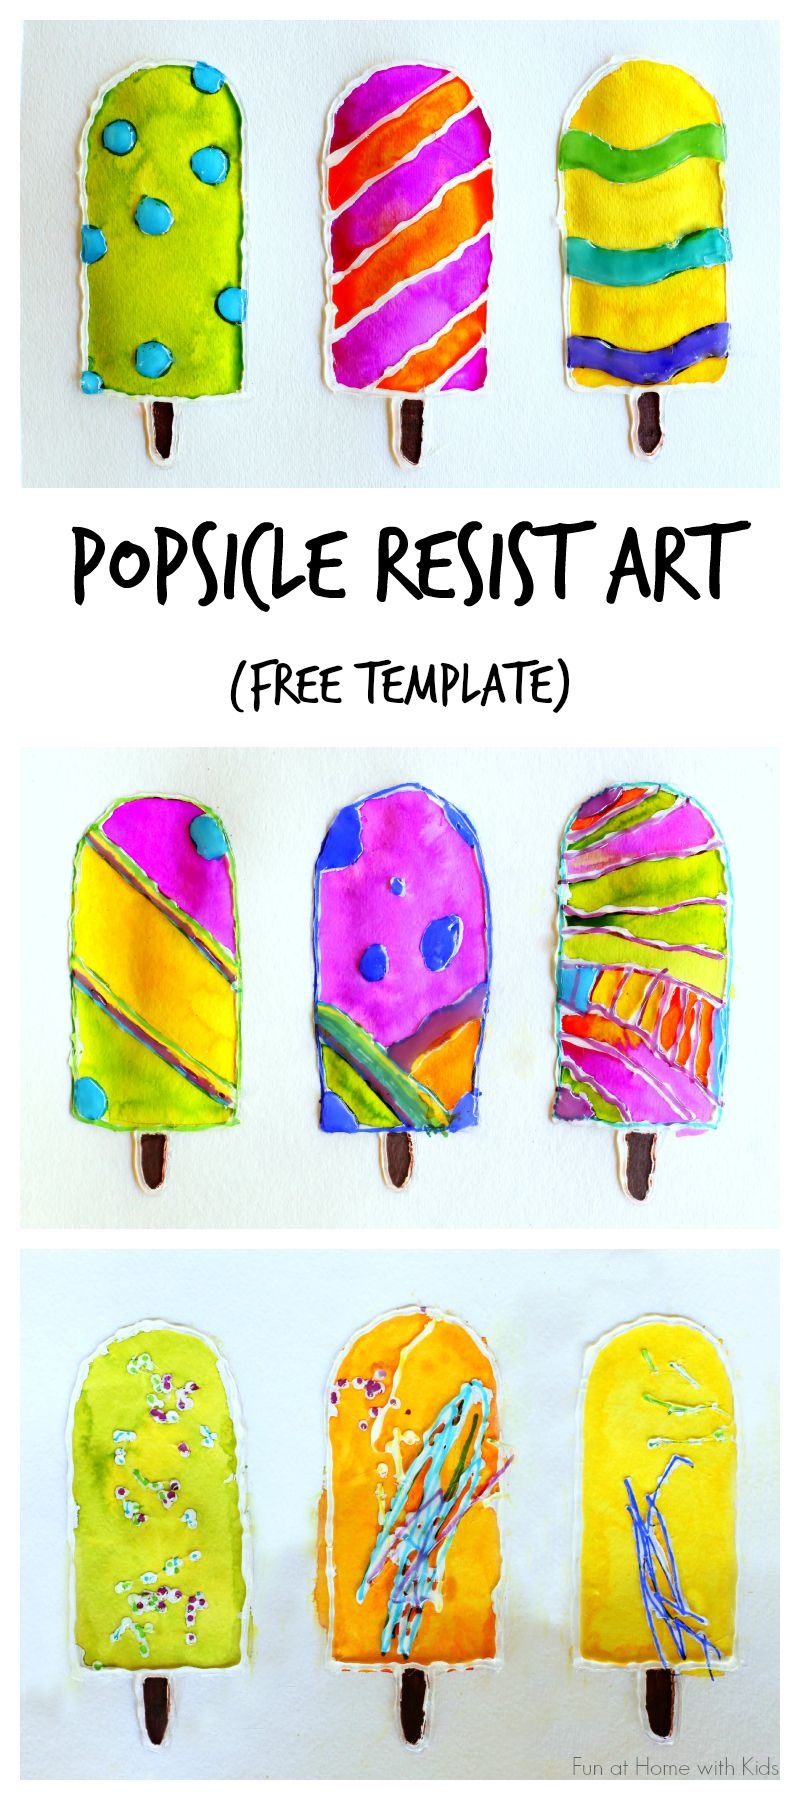 Popsicle Resist Art With Free Popsicle Template | New Teachers - Free Printable Popsicle Template